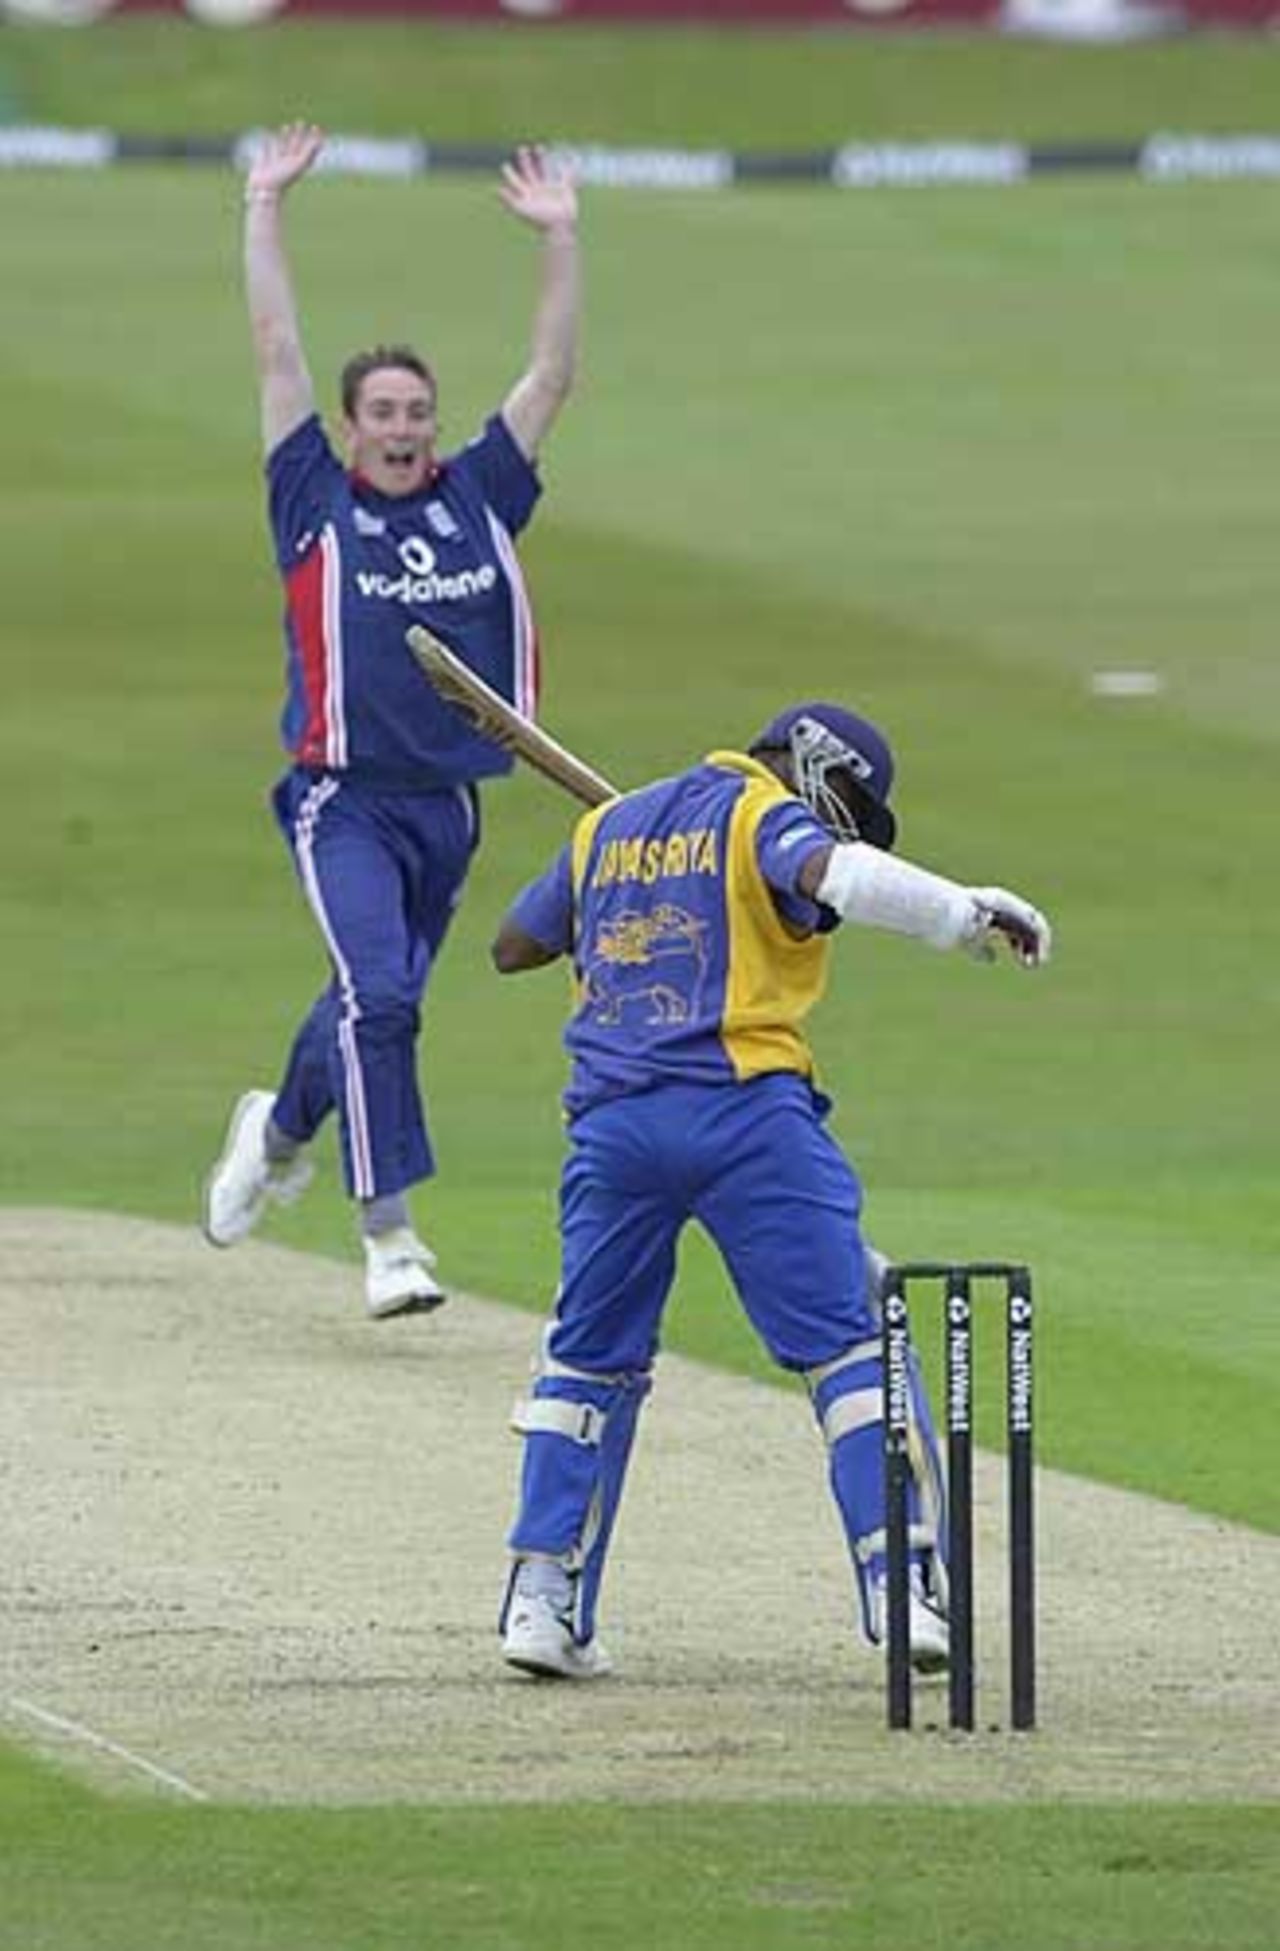 Kirtley goes up for the wicket of Jayasuriya lbw, but the umpire's finger stayed down, England v Sri Lanka at Leeds, July 2002